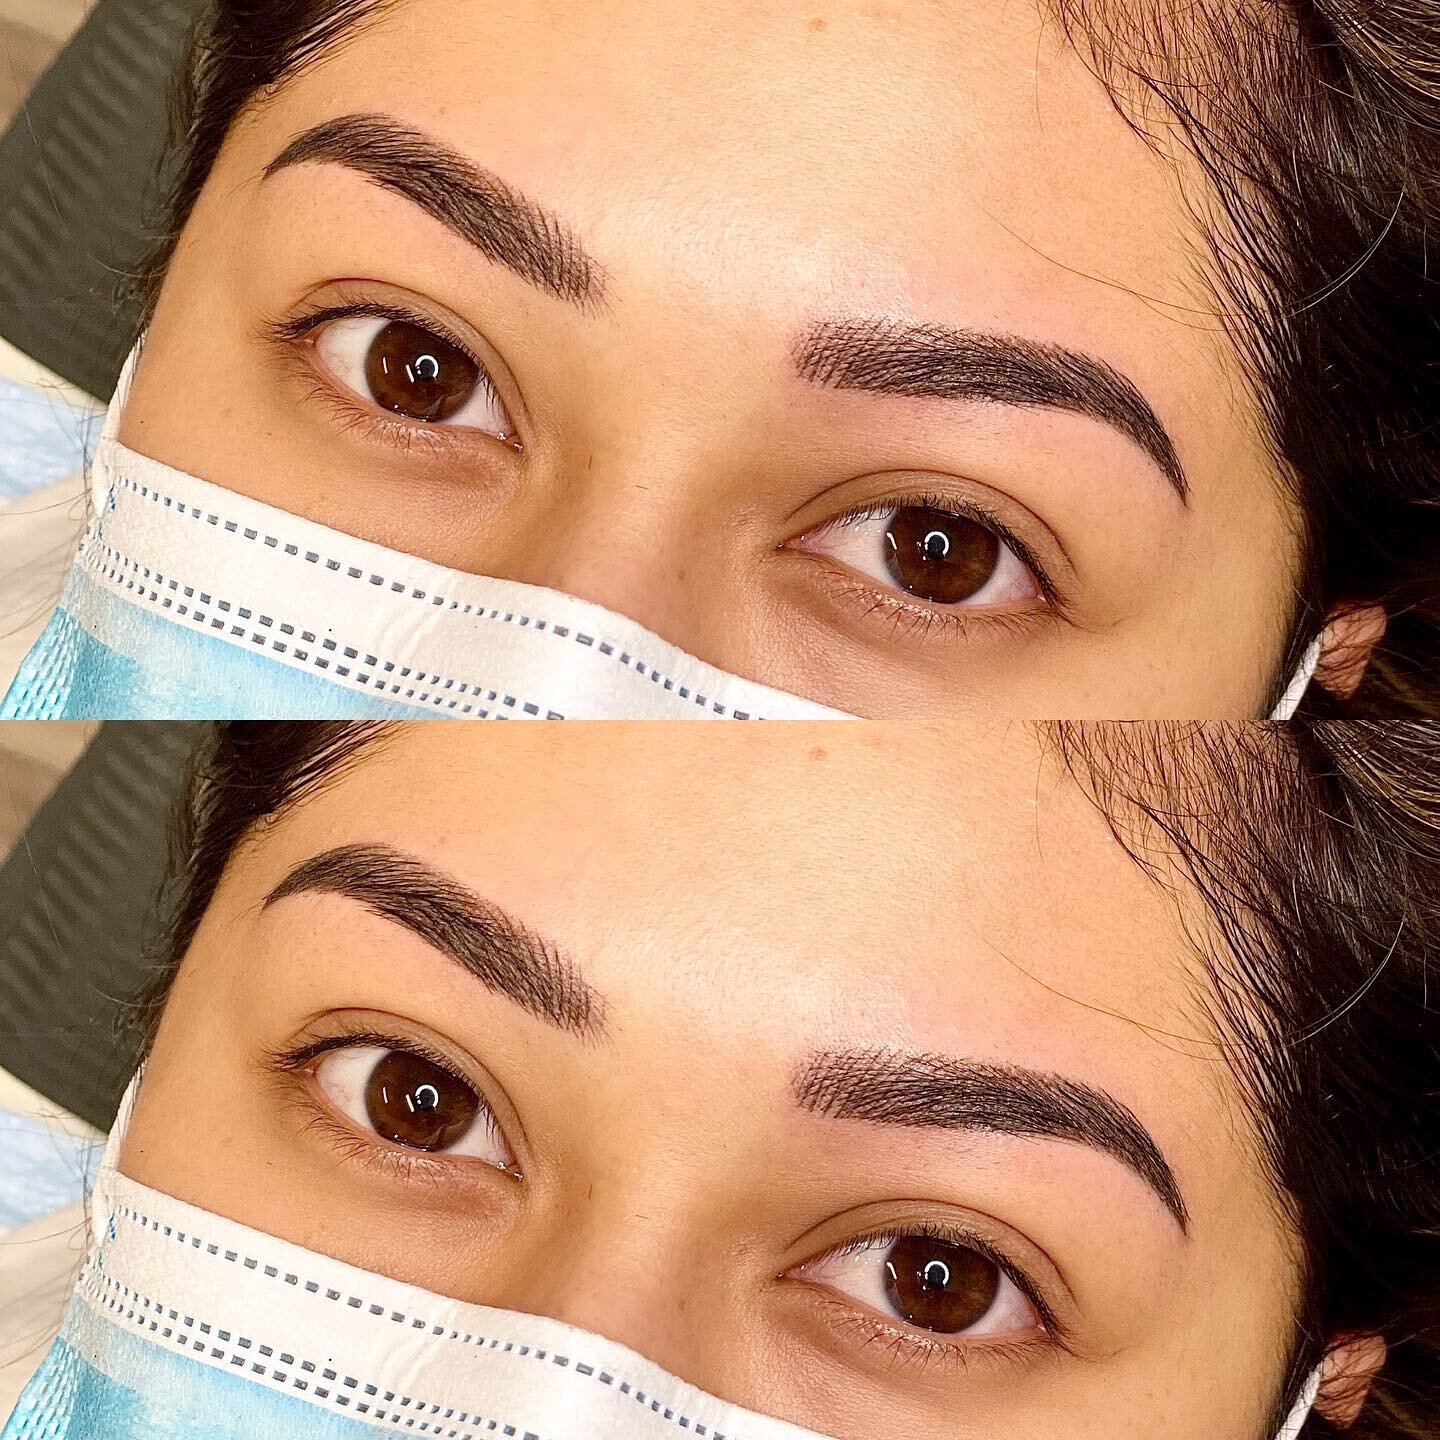 Yearly retouch up. More fuller and color. 14 month old Microblading. She still have hair strokes and shades naturally #microblading #microshading #powderbrows